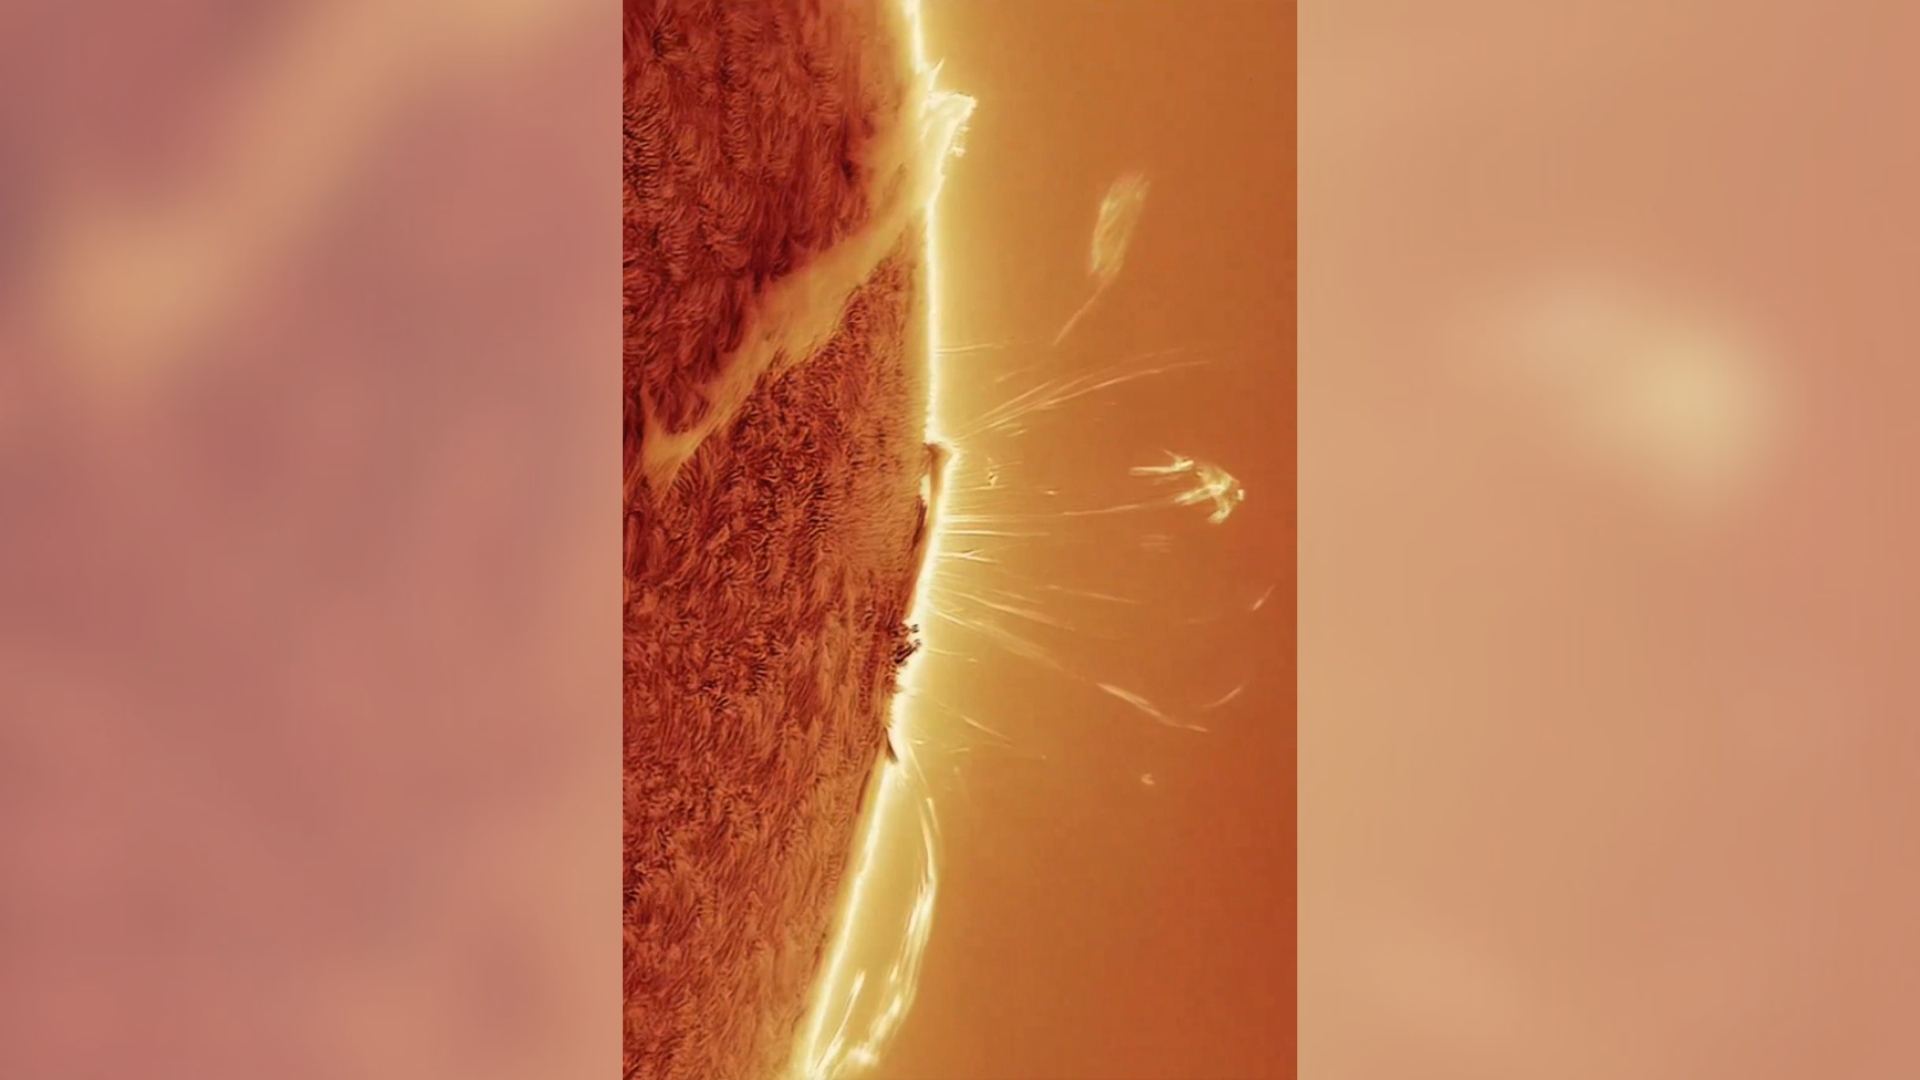 Astrophotographer captures stunning close-up views of sunspot region that spawned May’s auroras Space